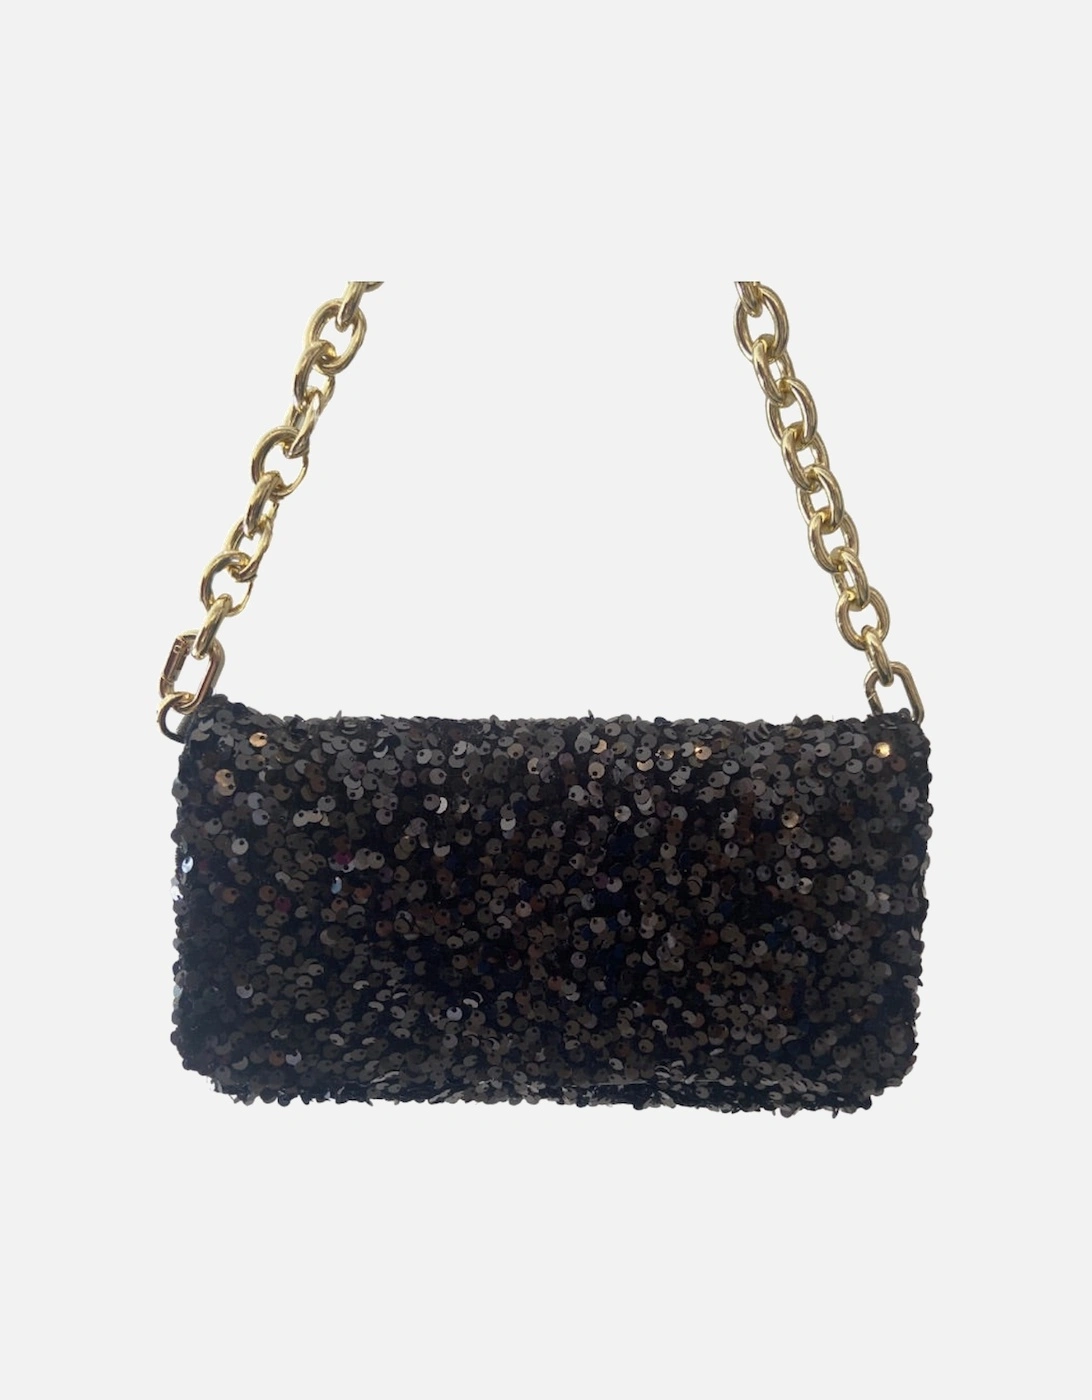 Black sequin clutch with gold chain strap, 2 of 1